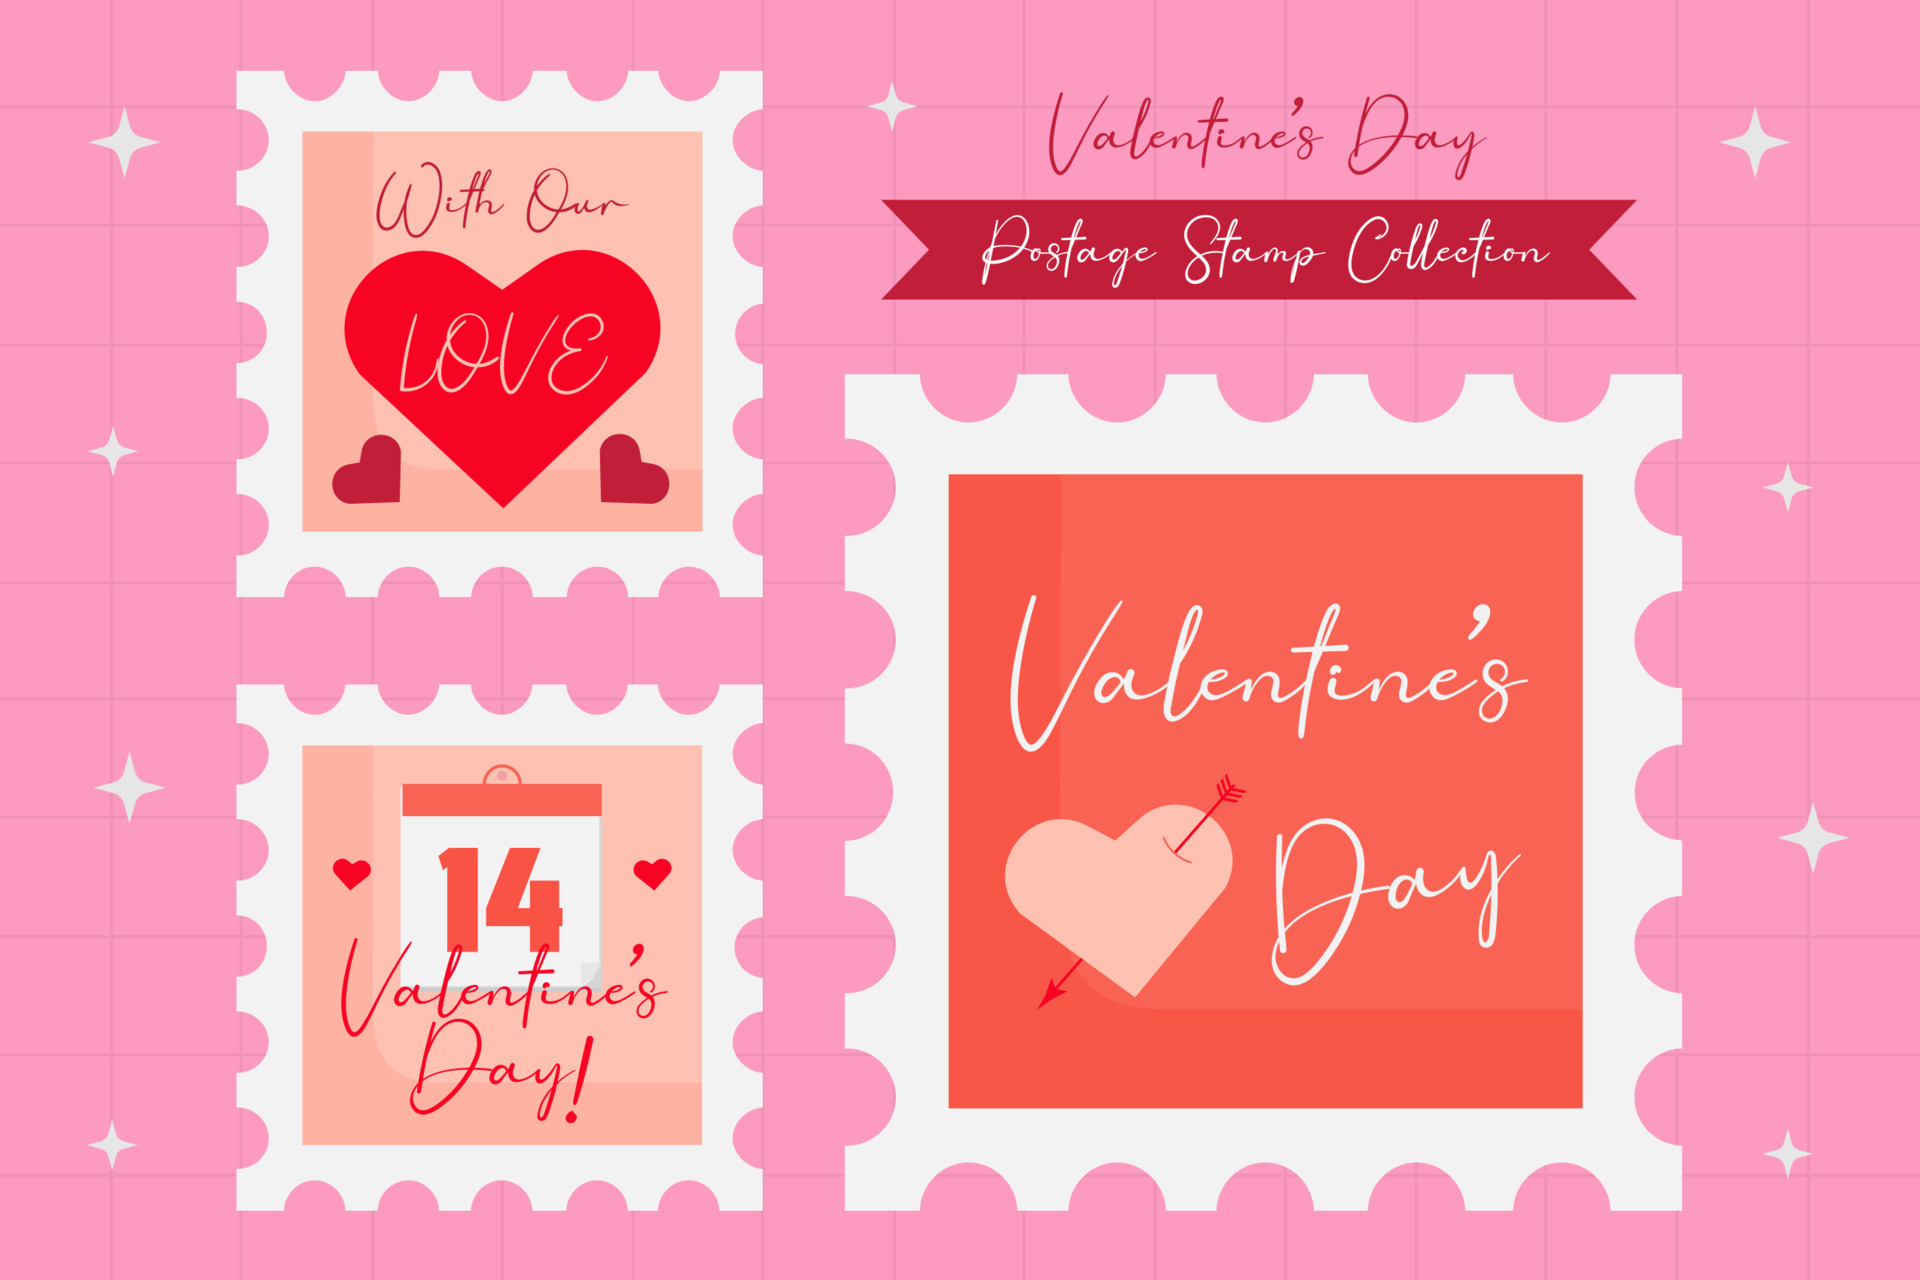 Love stamps - for wedding valentines day Vector Image